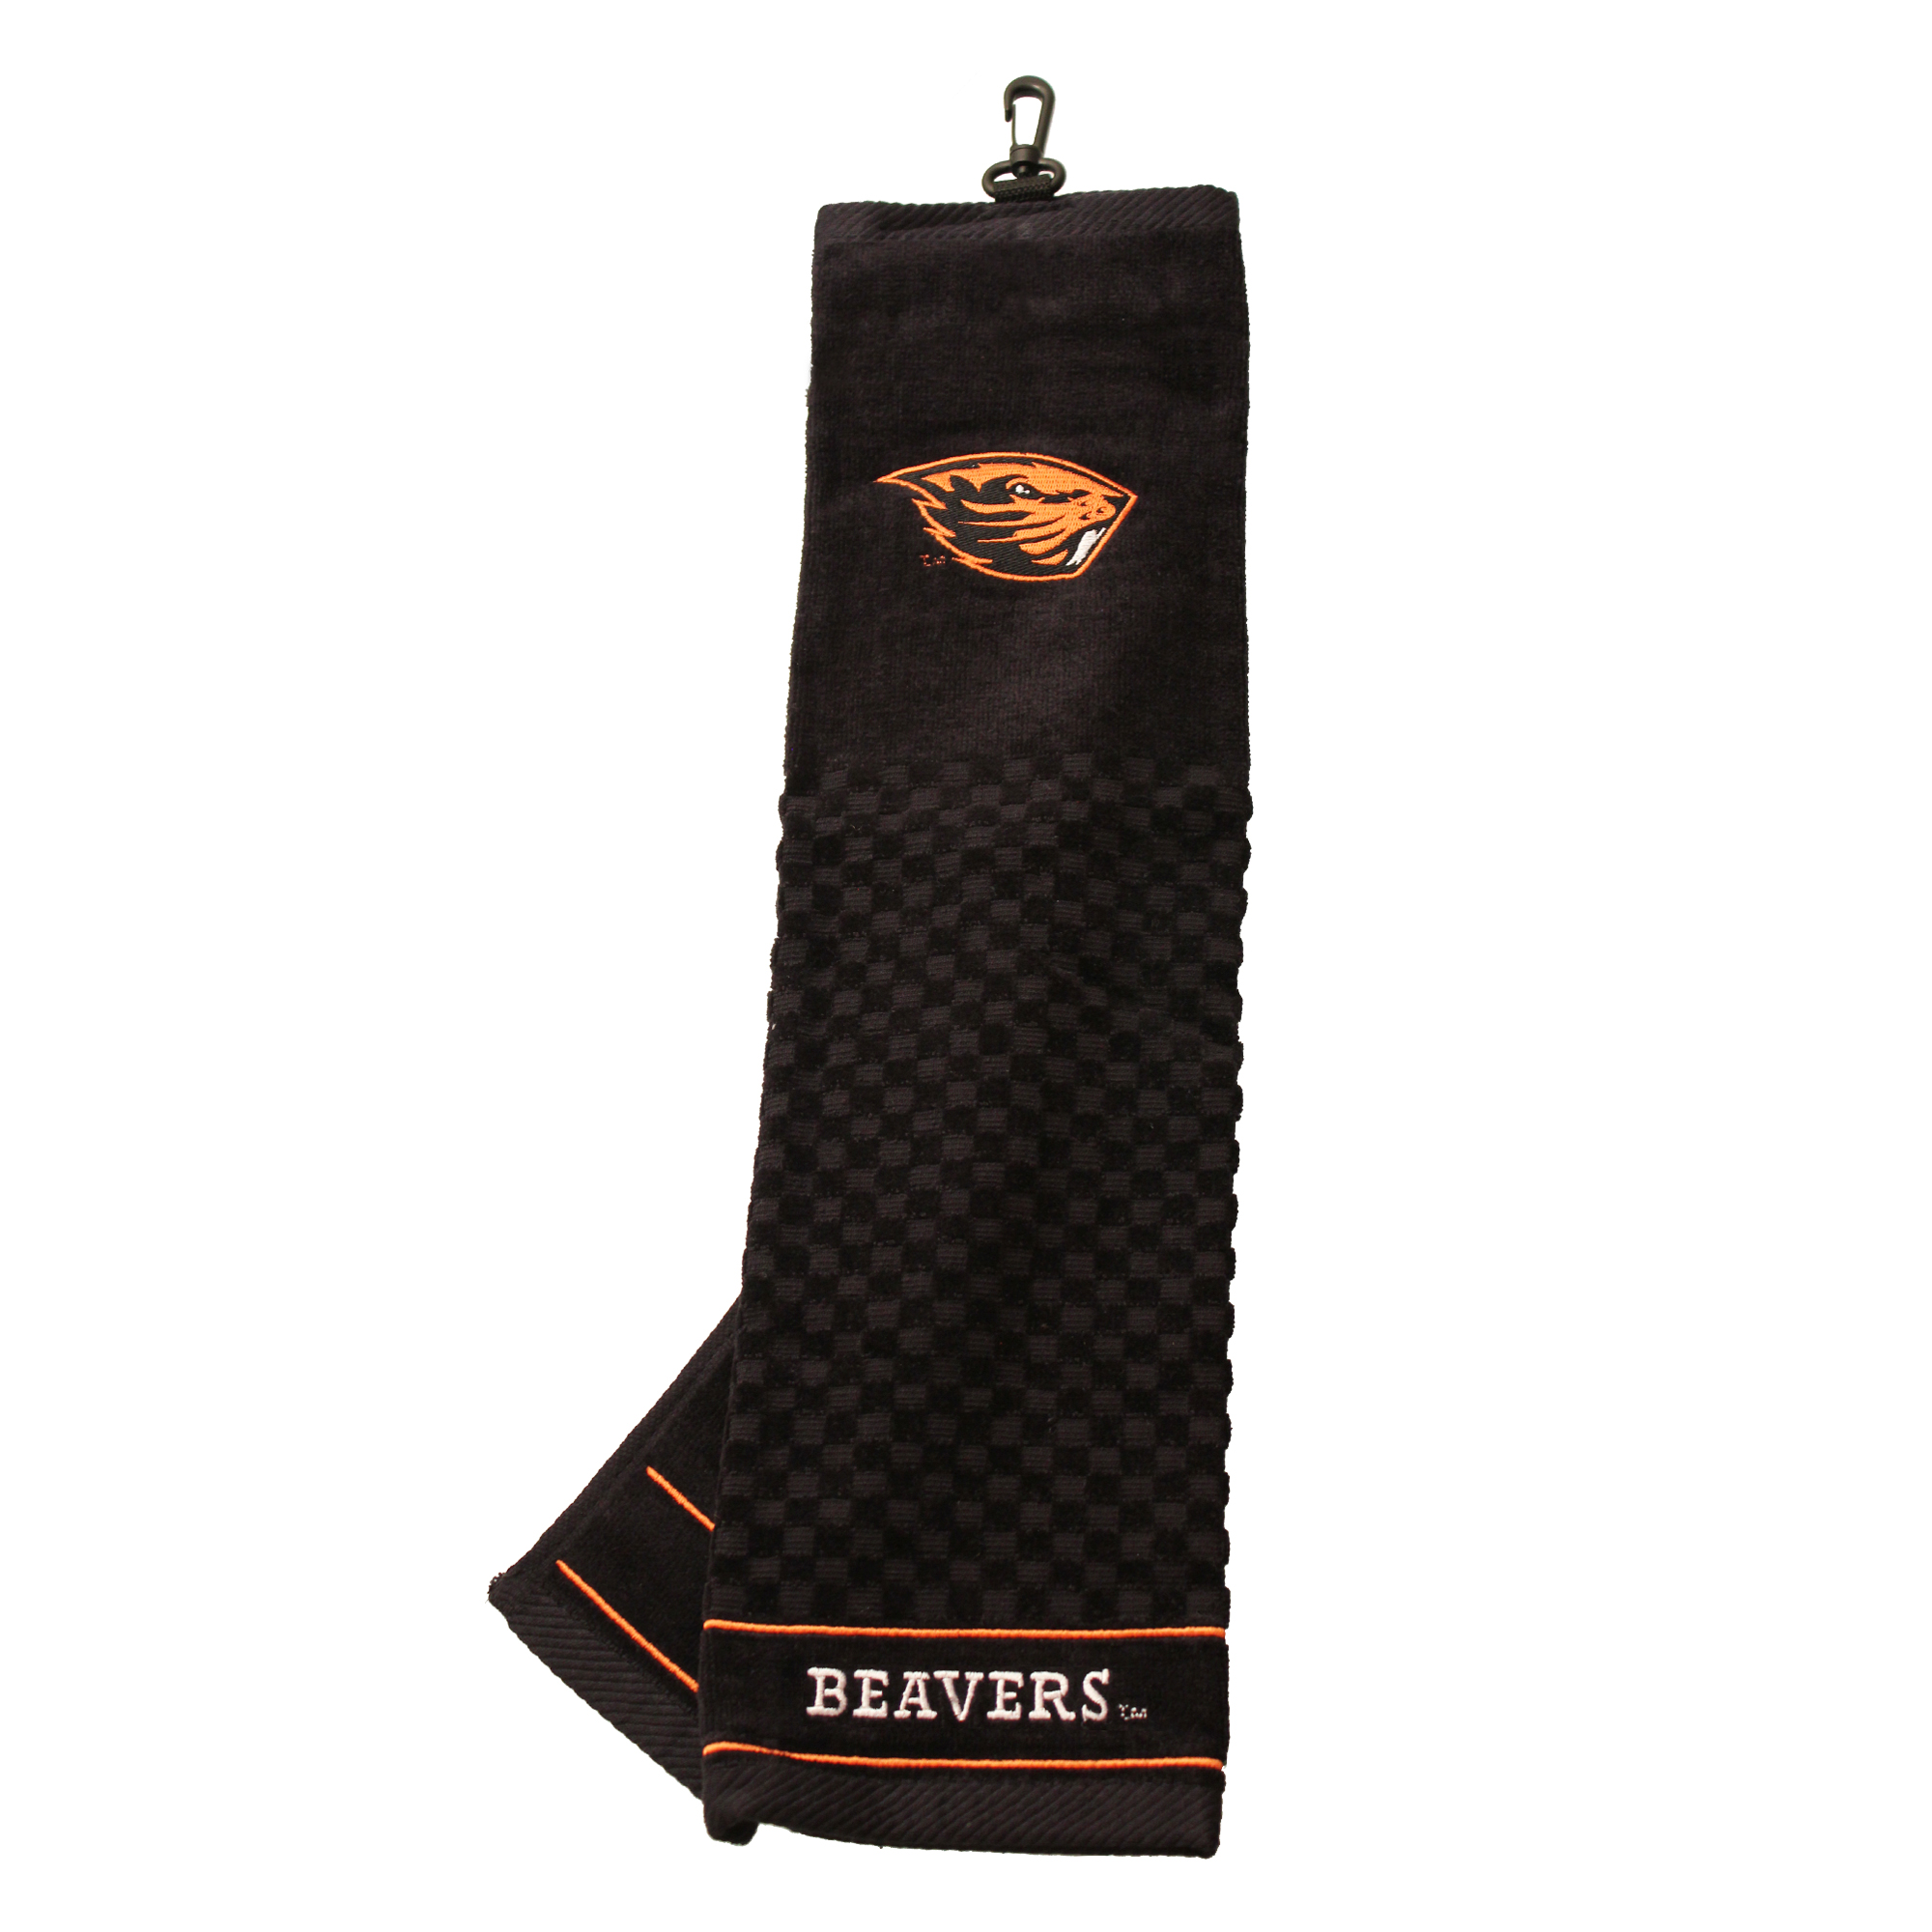 Oregon State Embroidered Towel